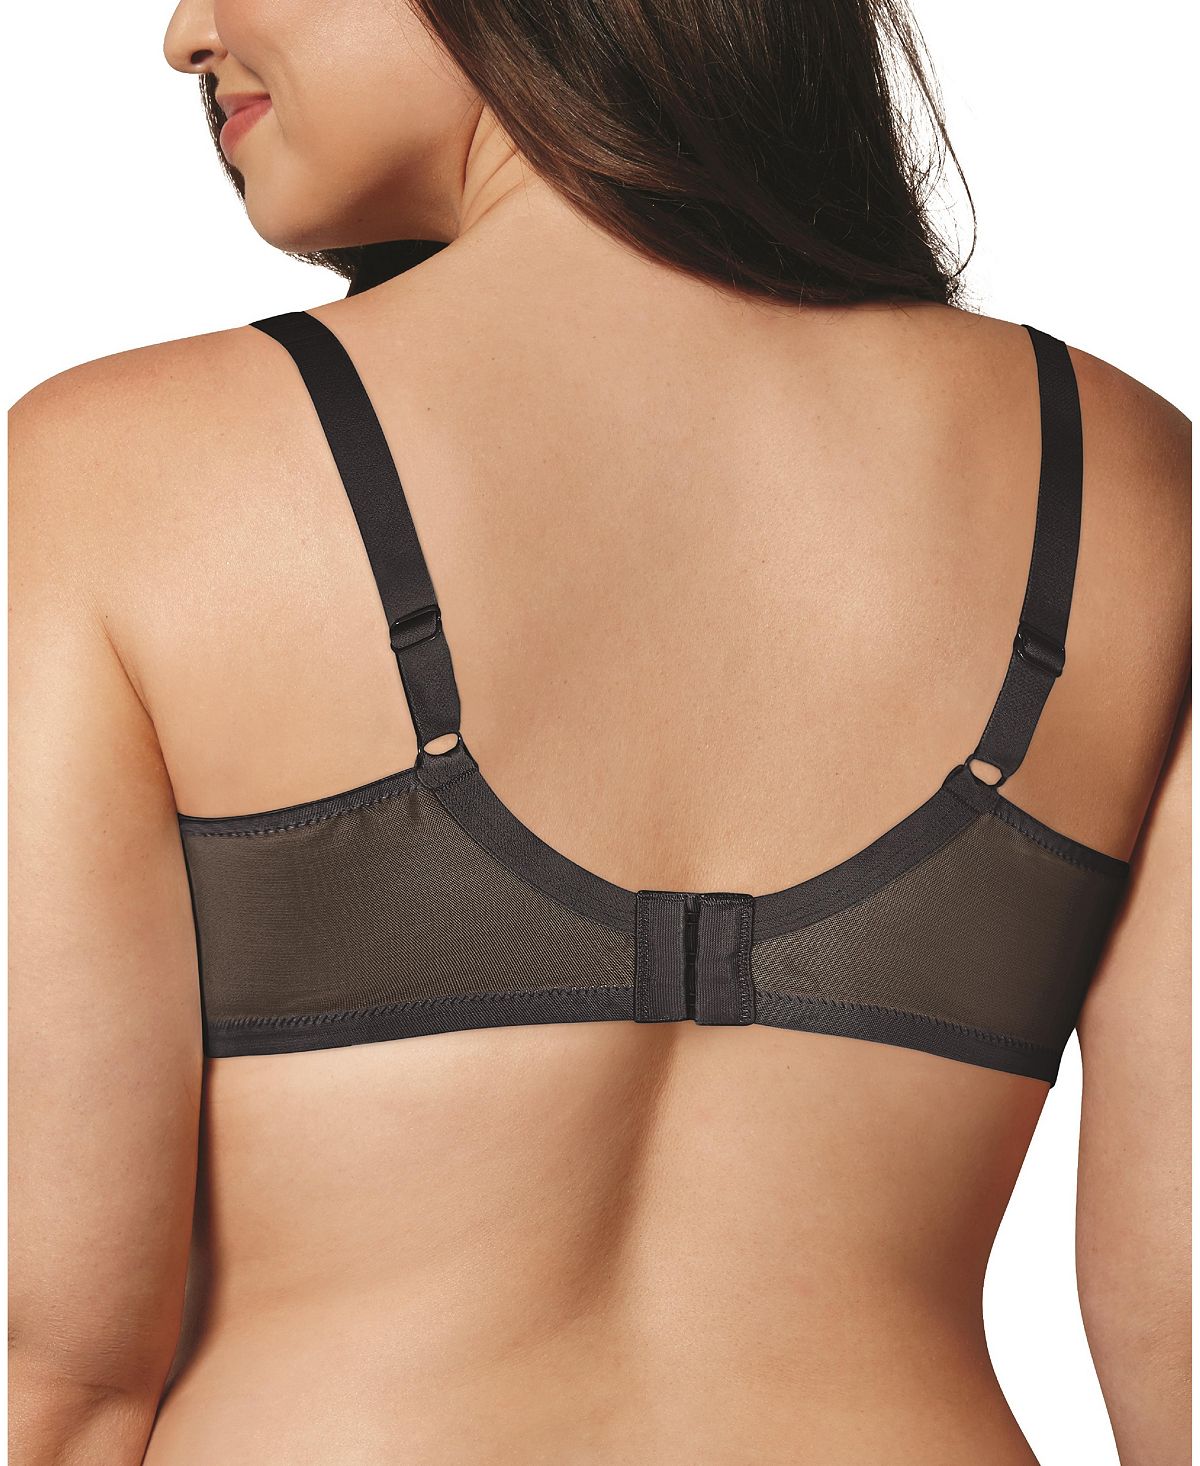 Playtex Love My Curves Side-Smoothing Embroidered Underwire Bra